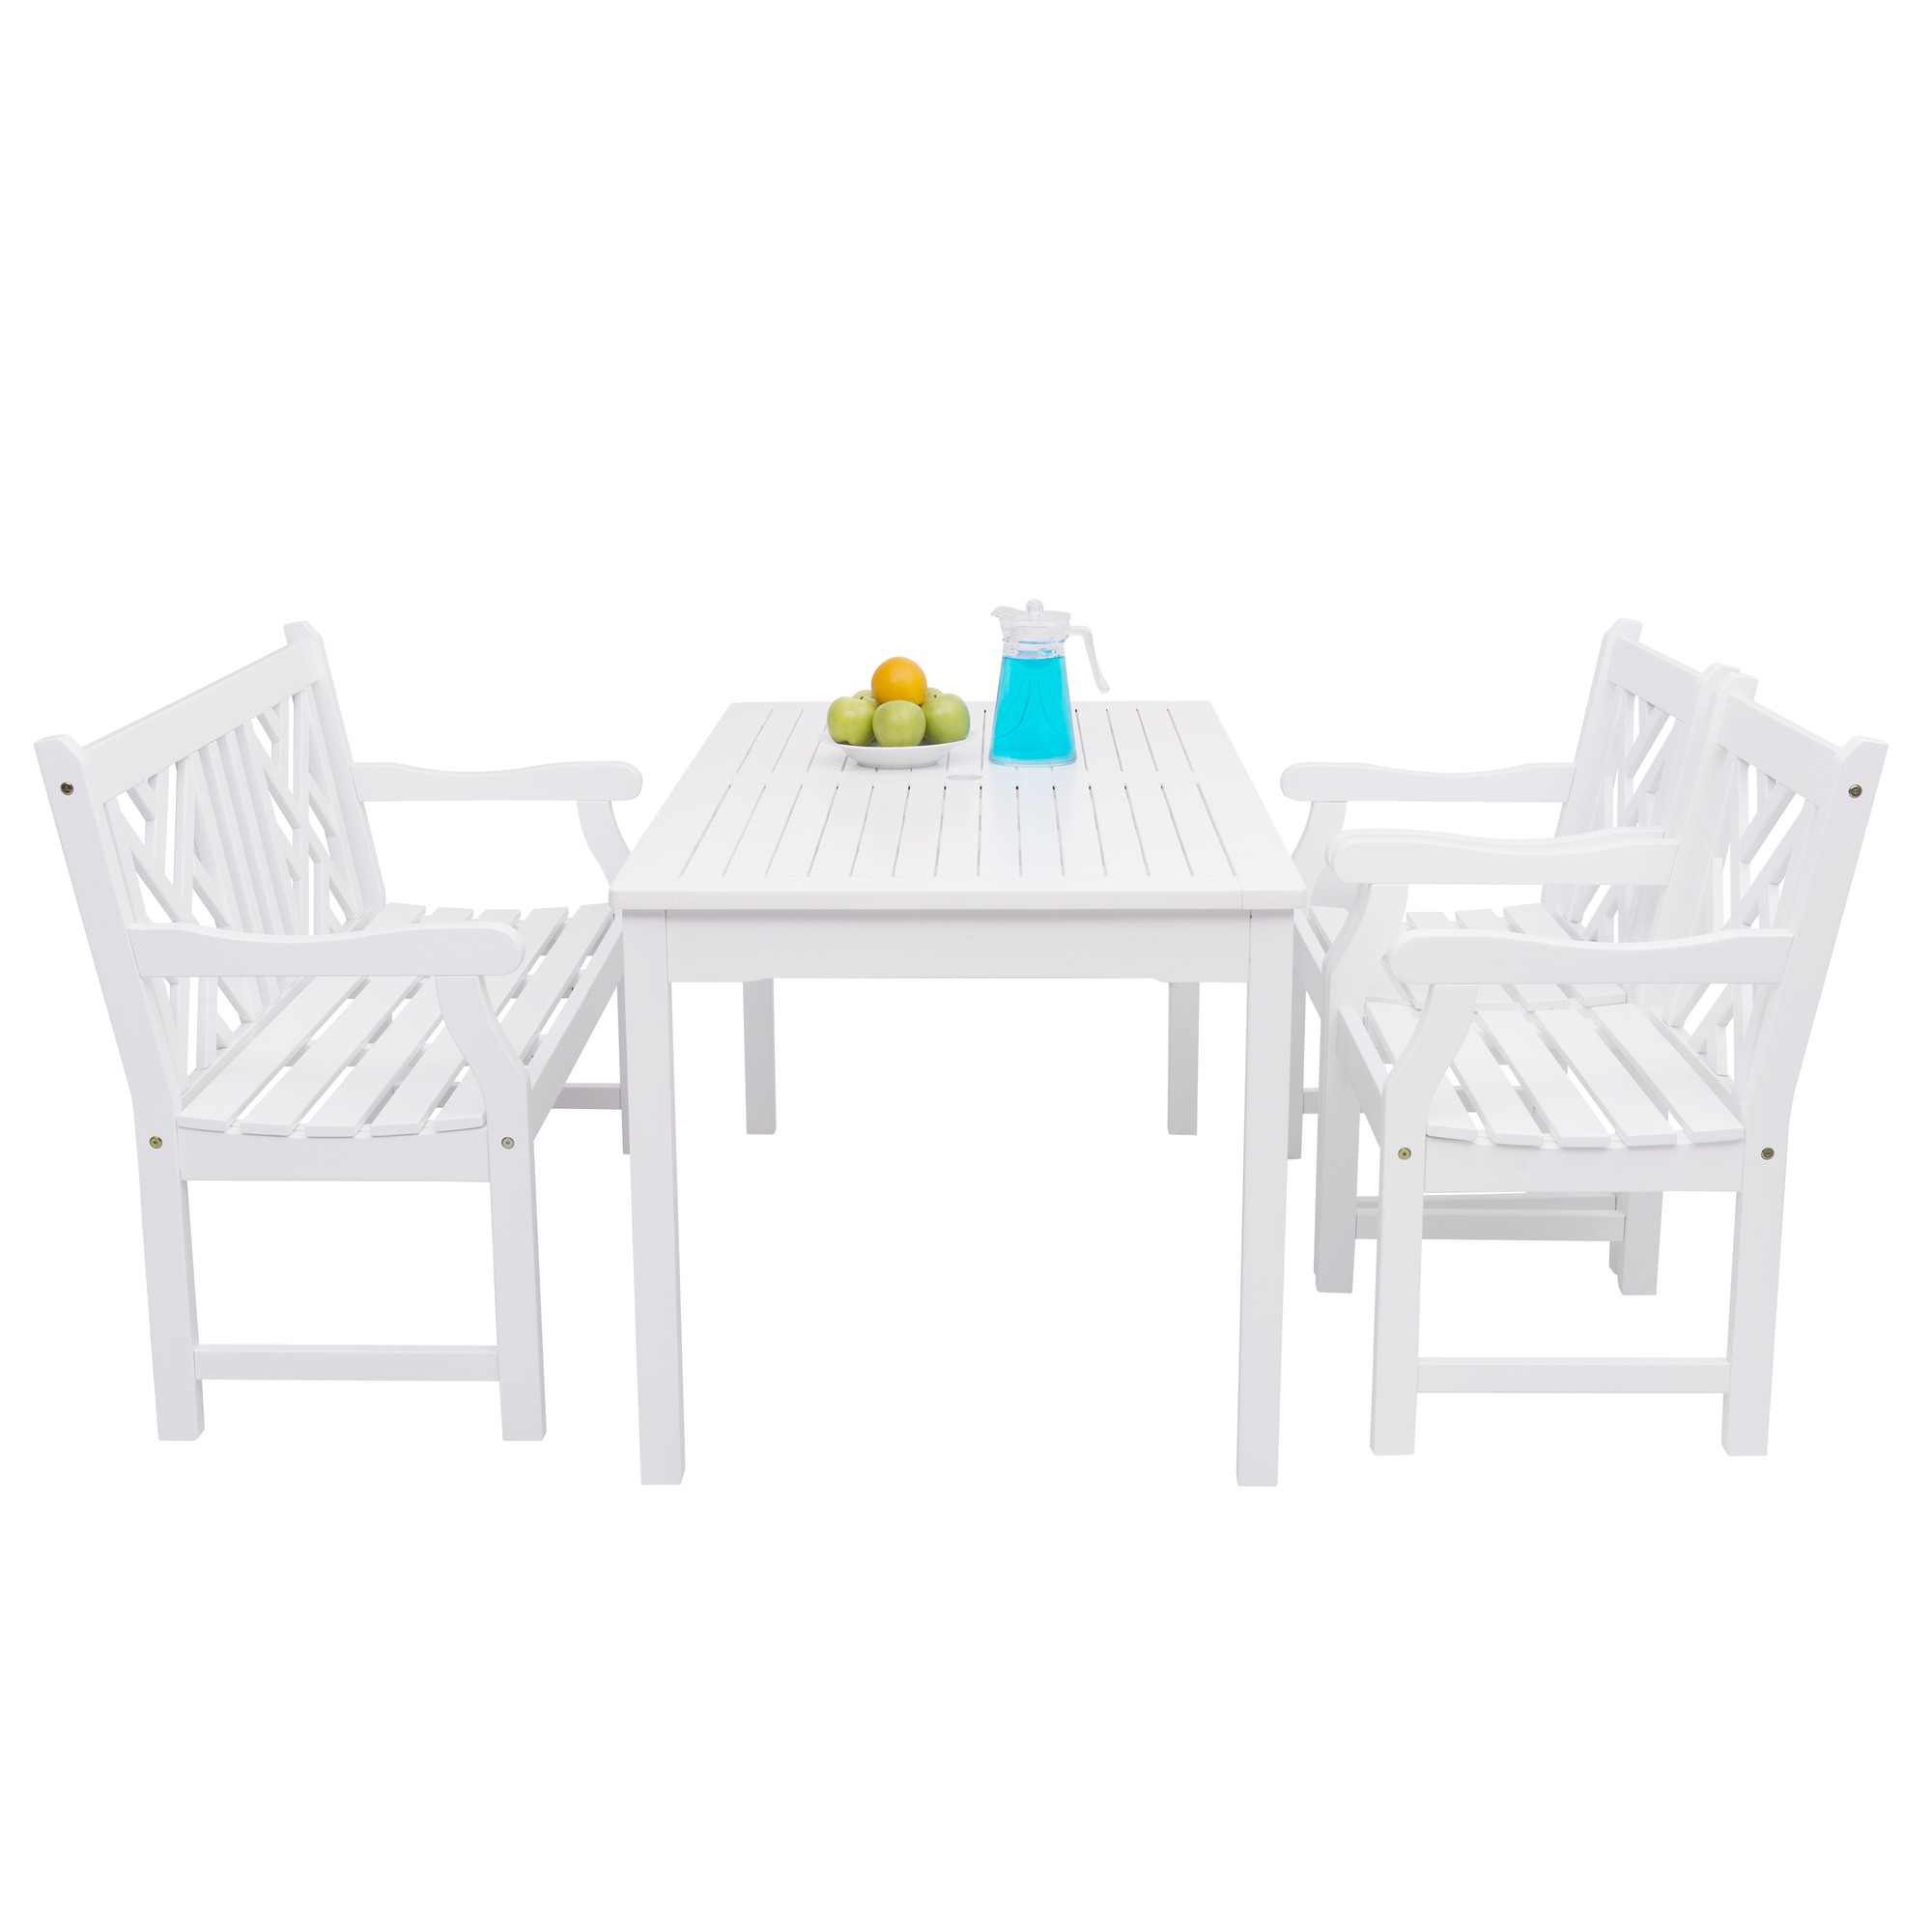 Bradley Outdoor 4-piece Wood Patio Dining Set with 4-foot Bench in White